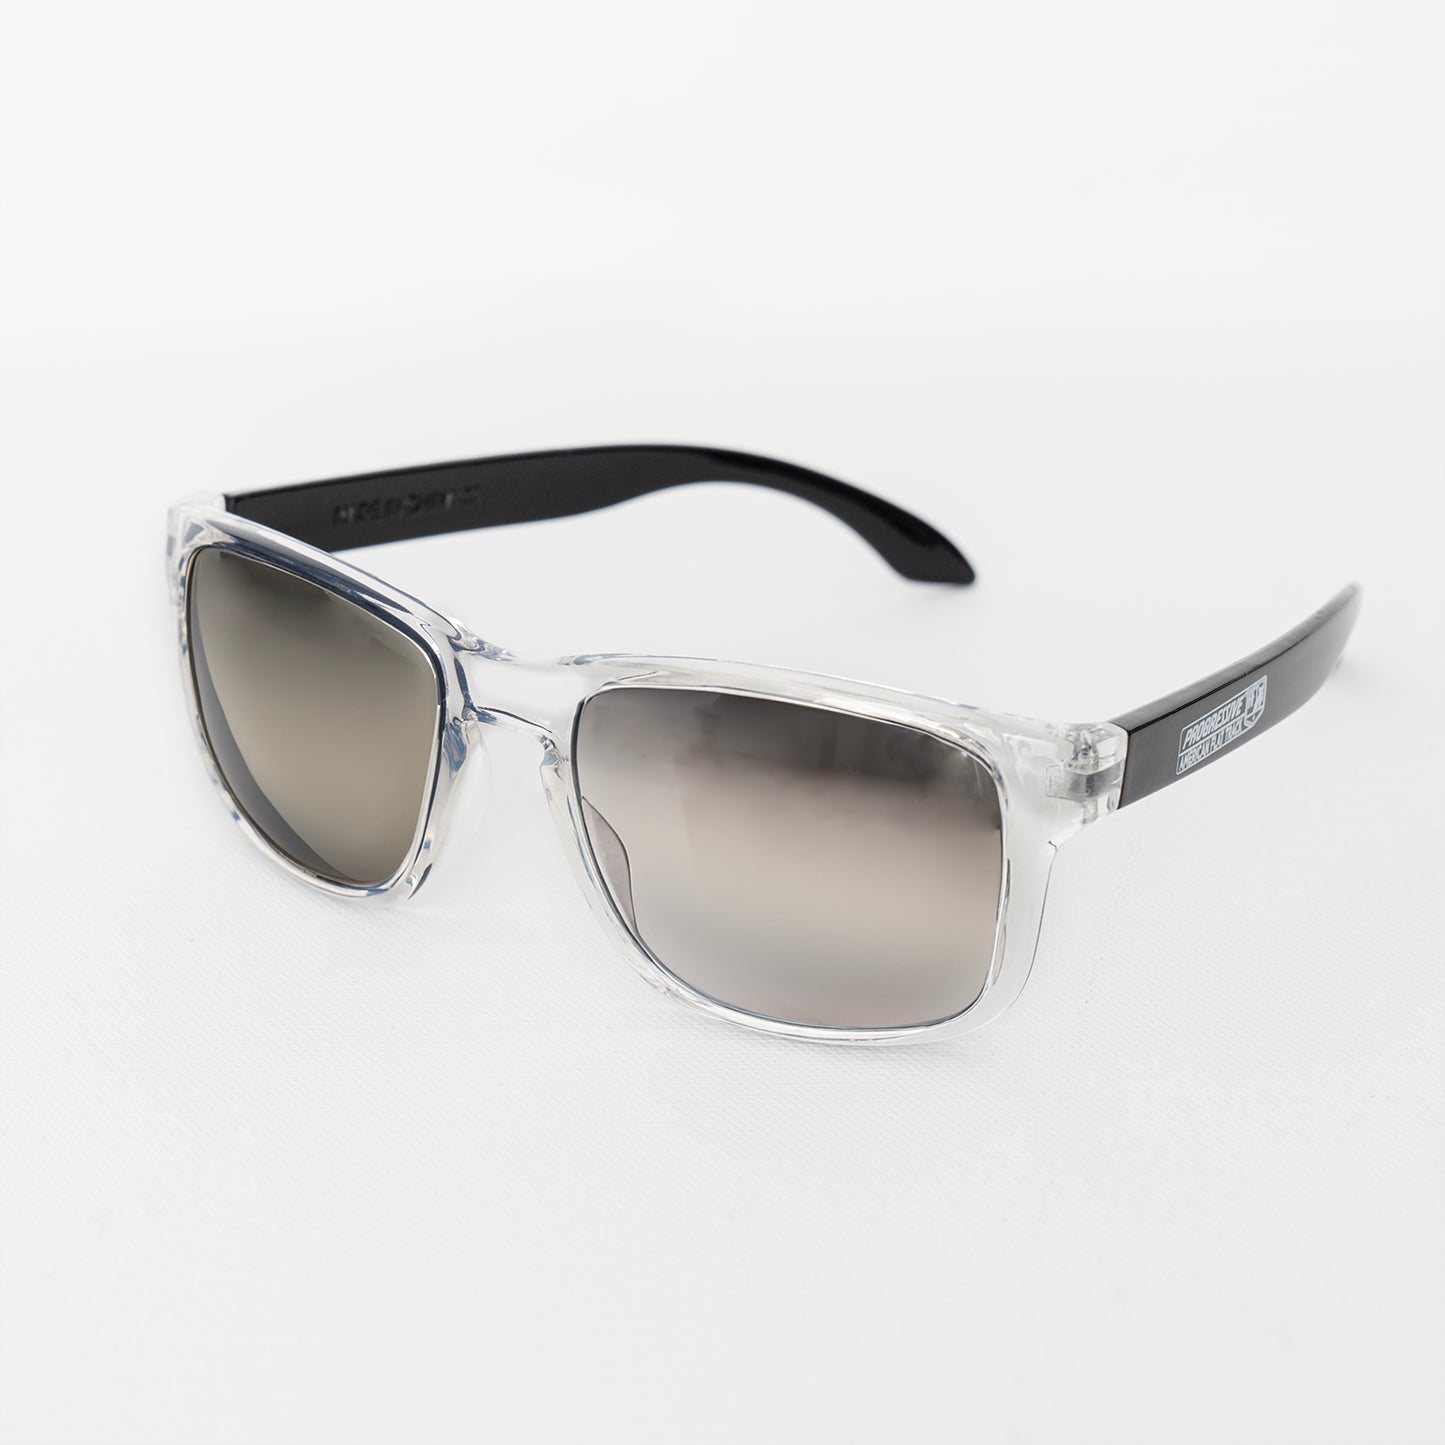 AFT Sunglasses with Mirrored Lenses